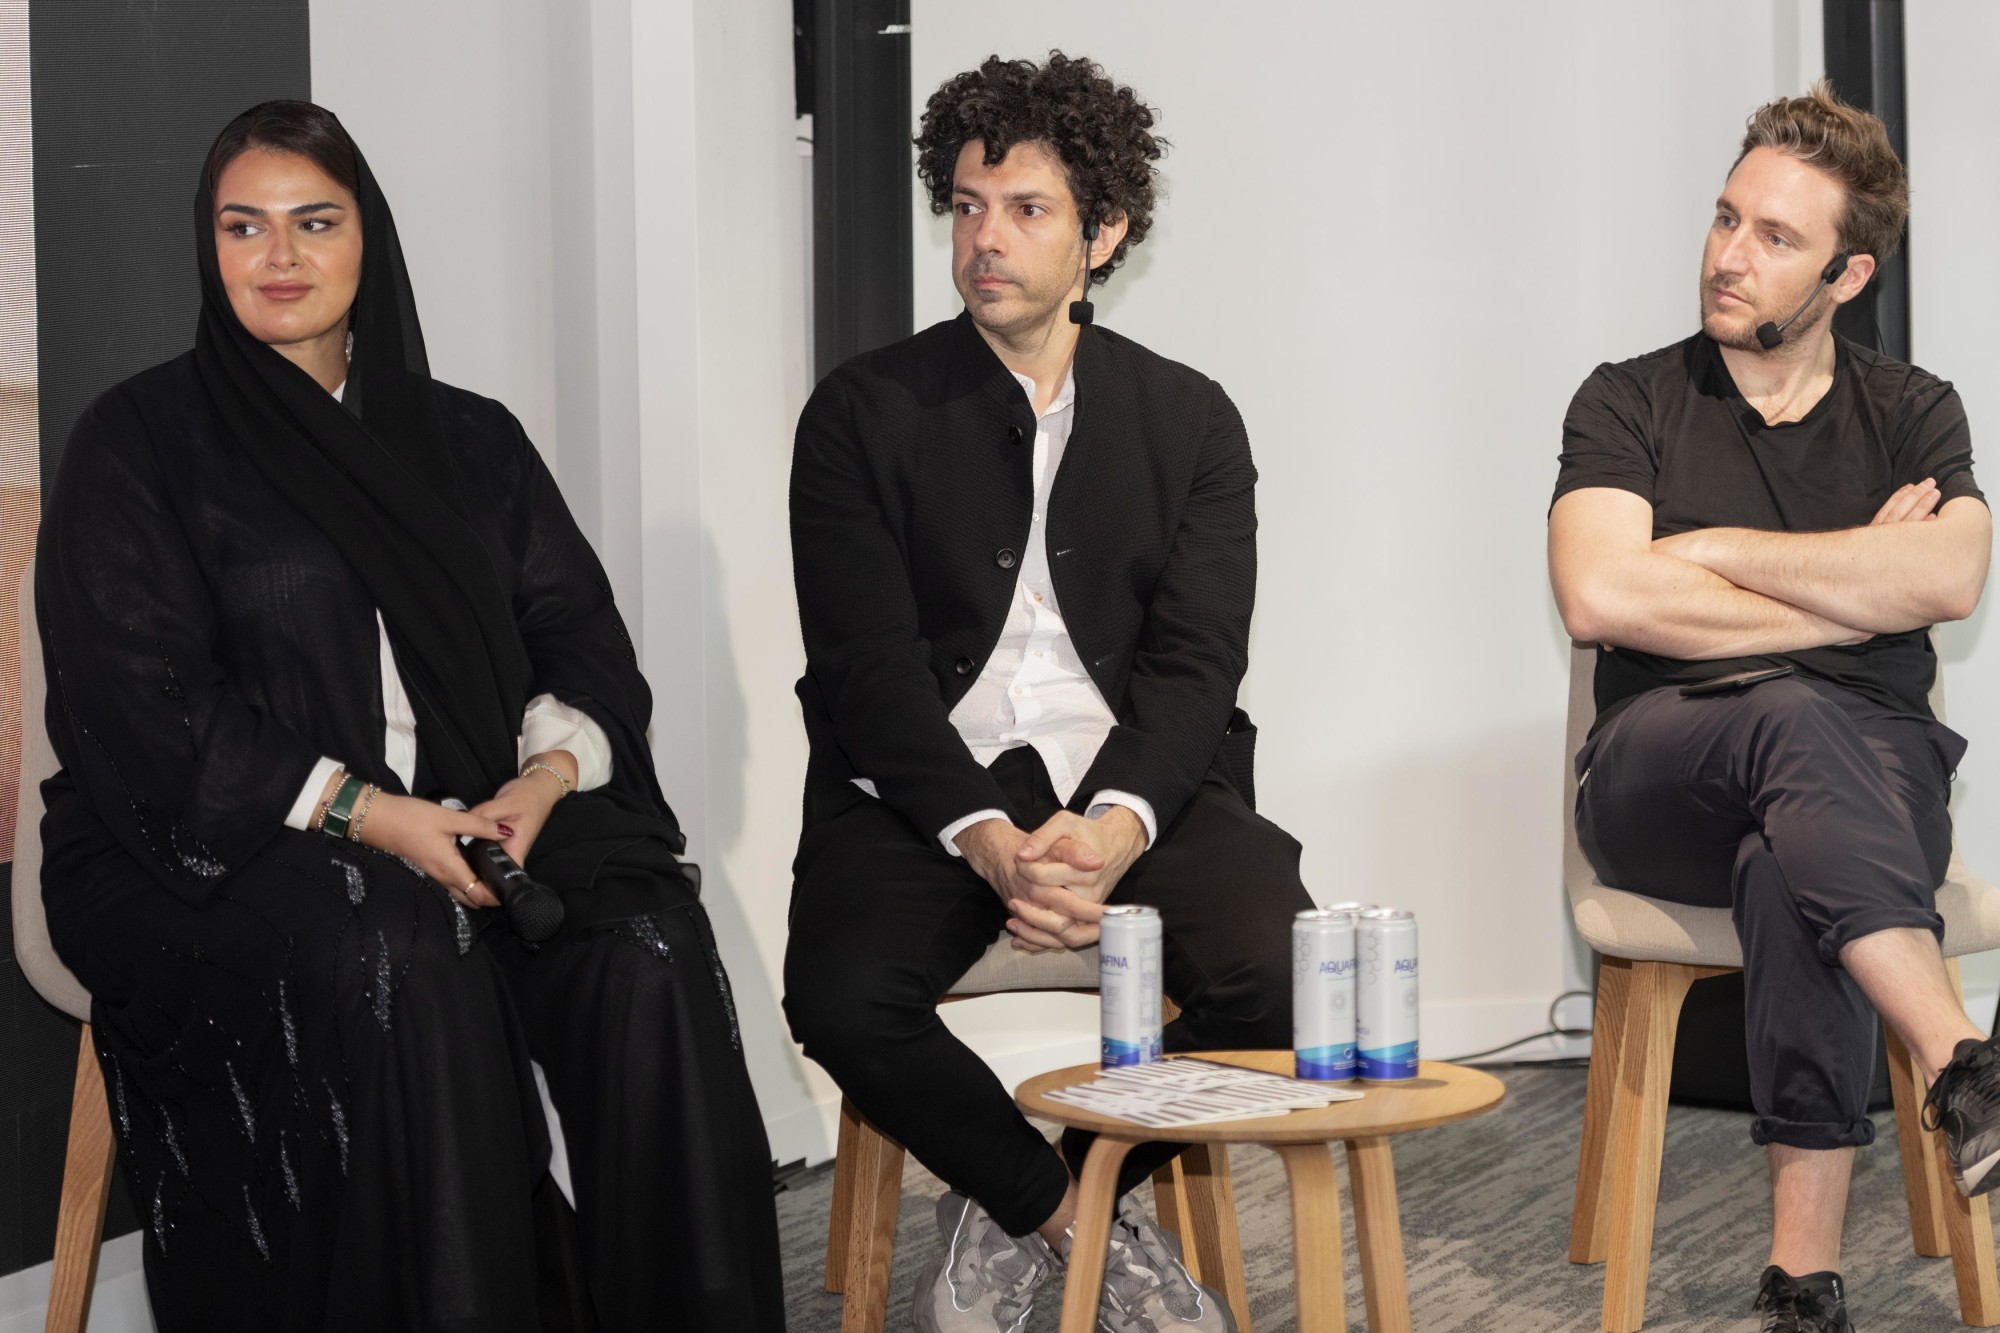 Carmelo Zappulla (C), Founder and Executive Director External Reference, Edouard Cabay (R), Architect and Founder and Principal of Appareil and Salama Al Shamsi (L), Director of Qasr Al Hosn during the Technology and Crafts Interpretation o